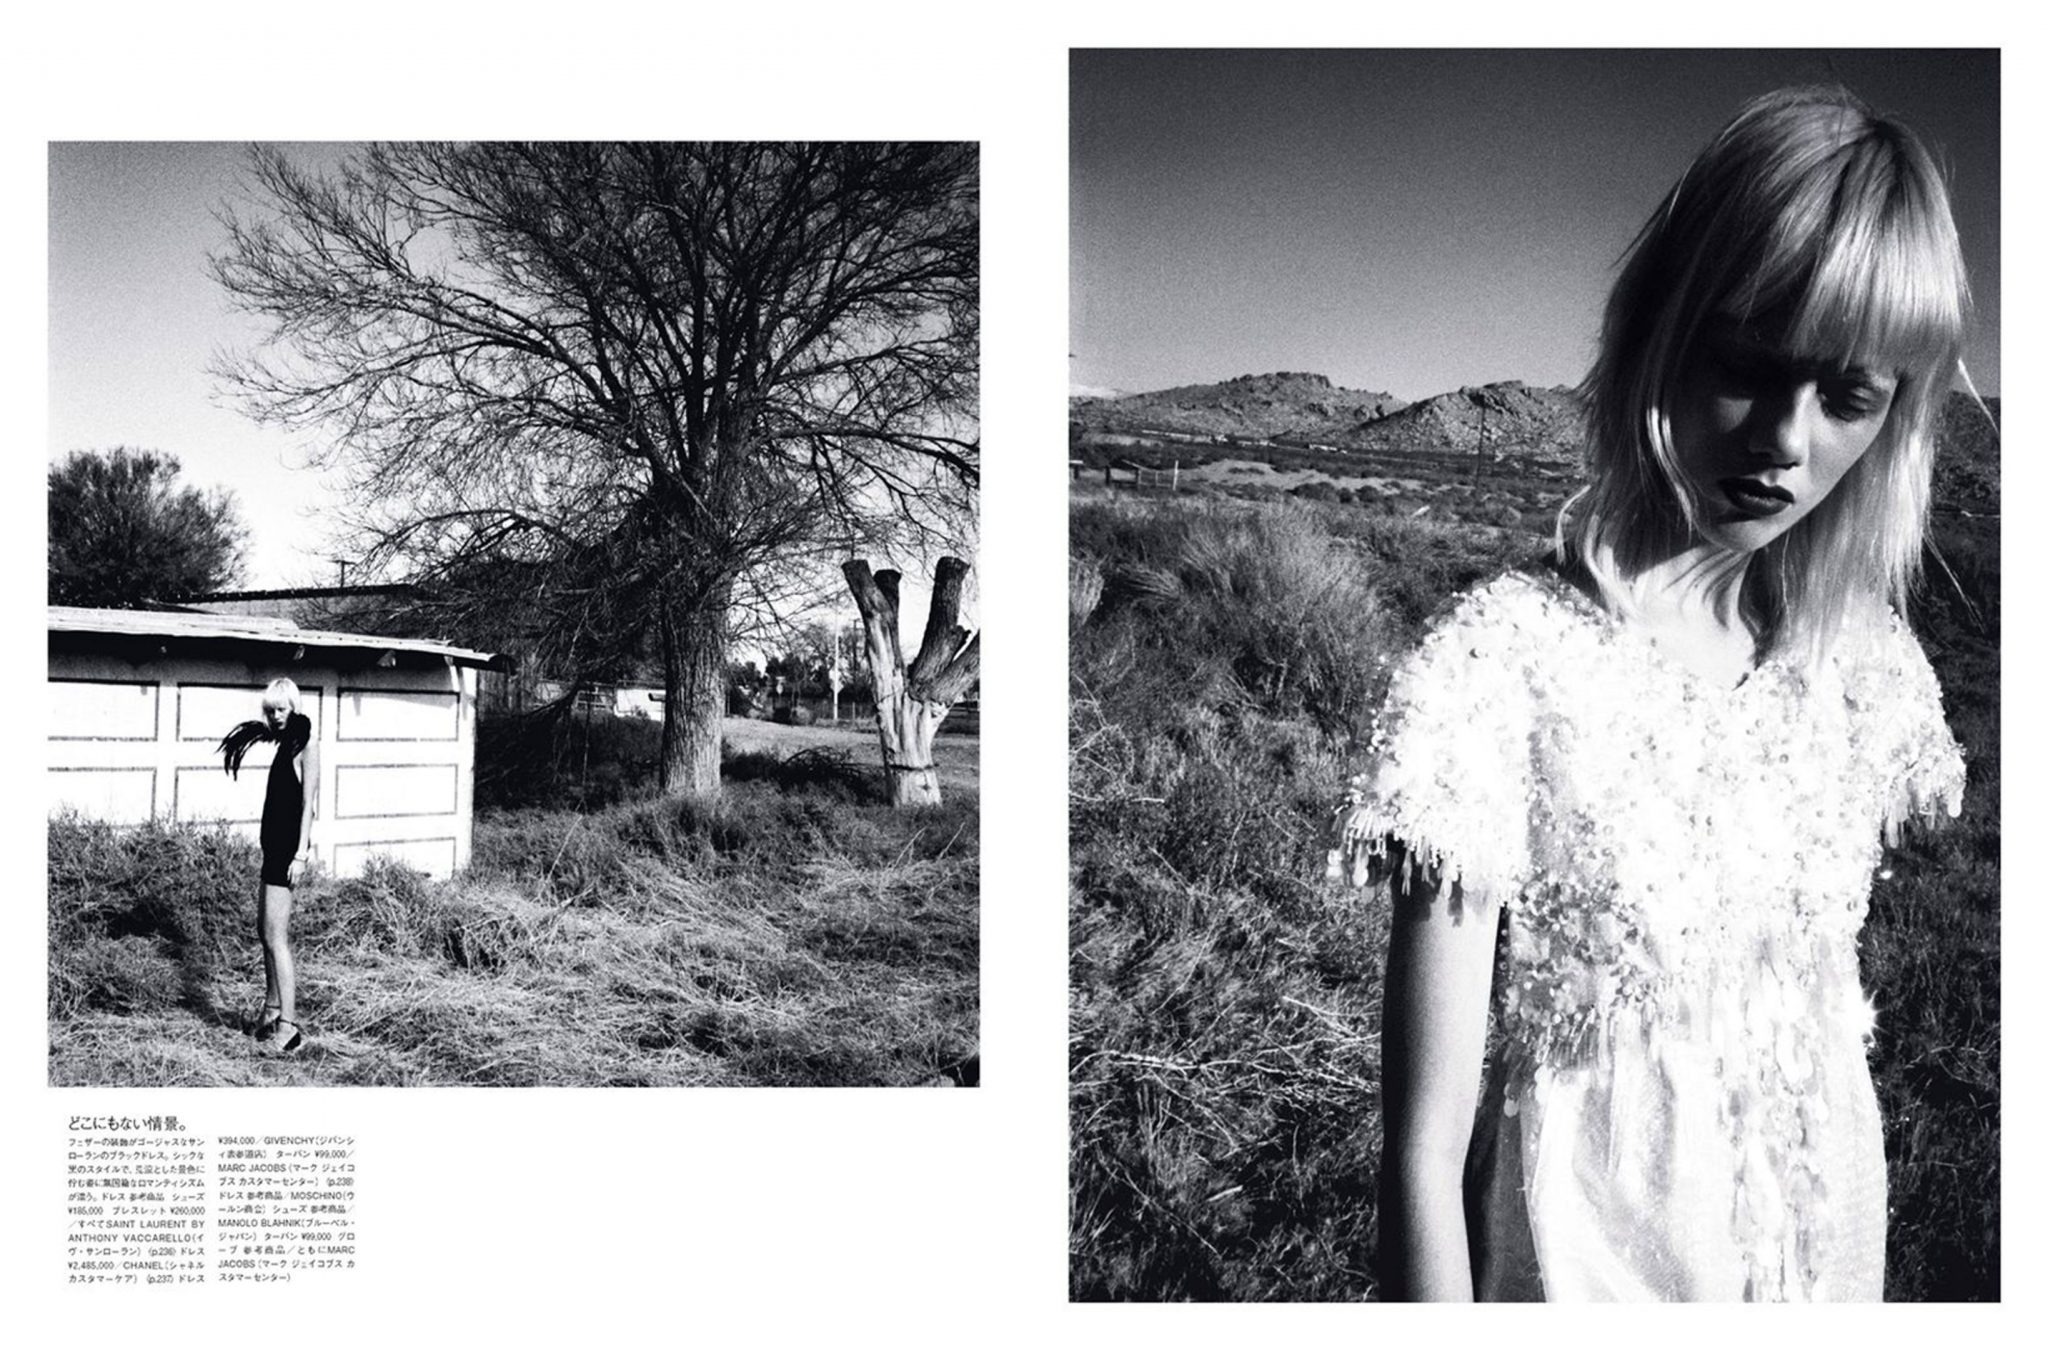 Paul Sinclaire | Vogue Japan: My Country Roots | 2